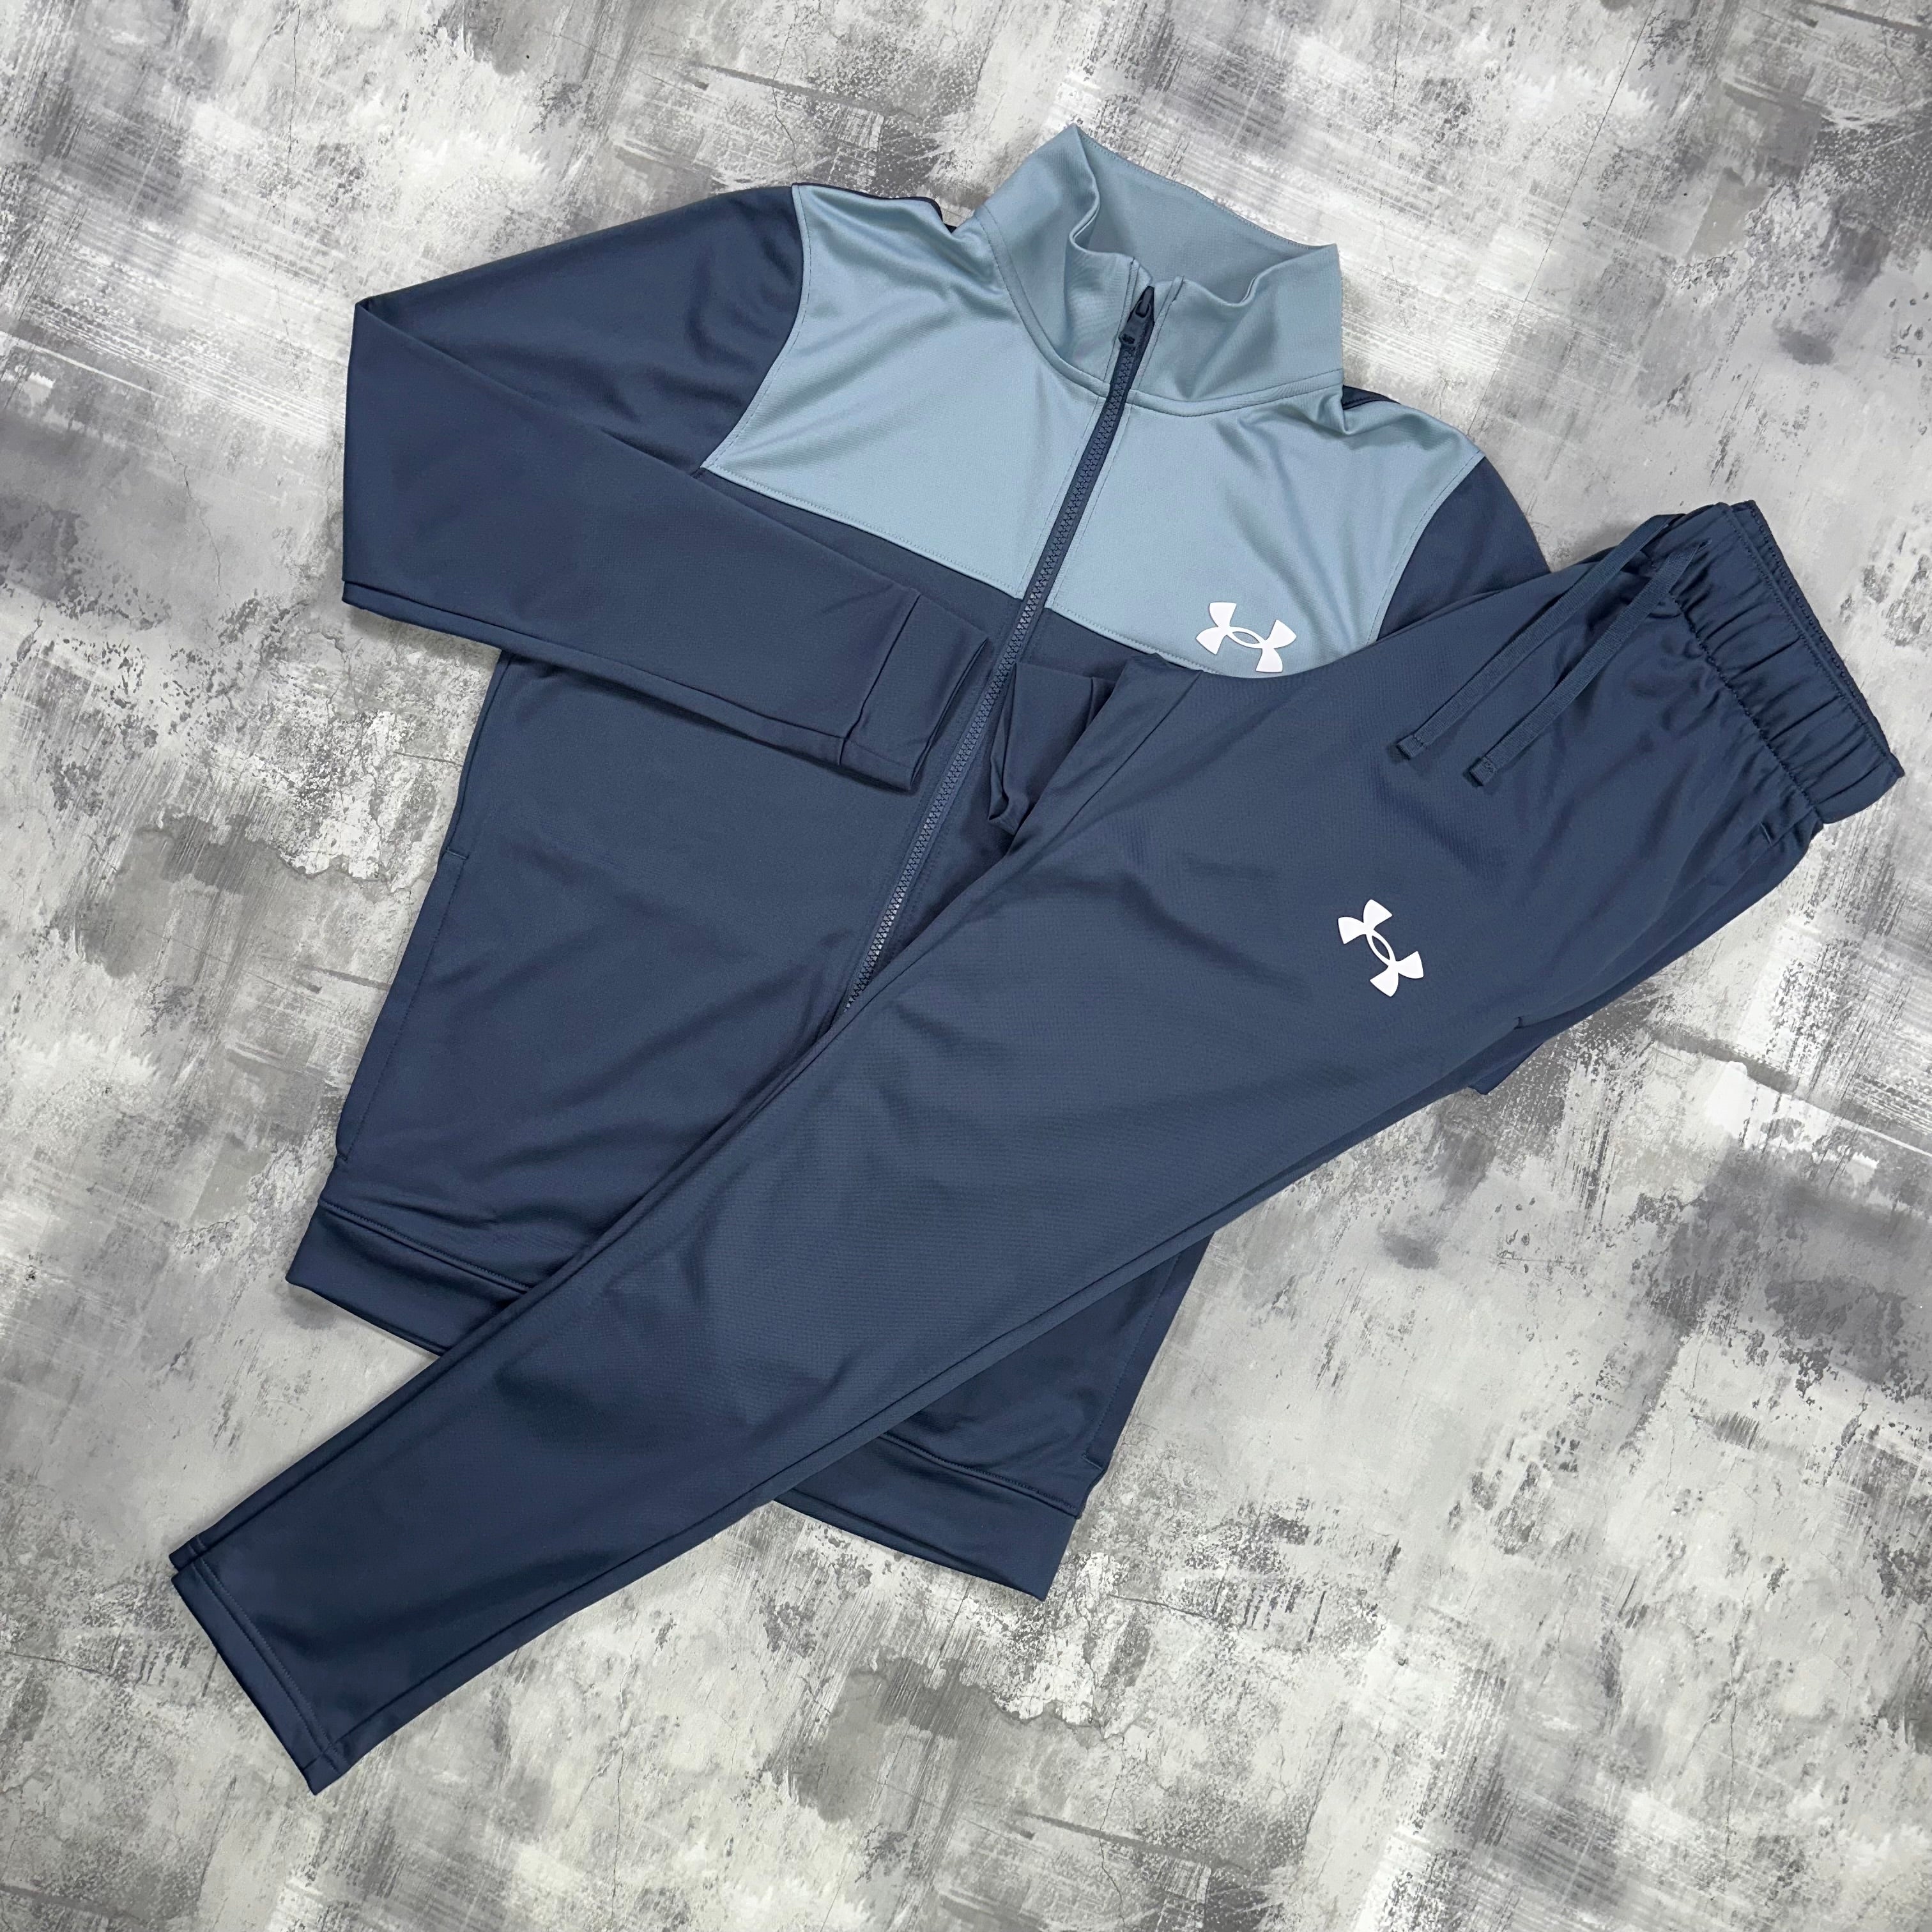 Under Armour tracksuit Obsidian - Jacket & Trousers